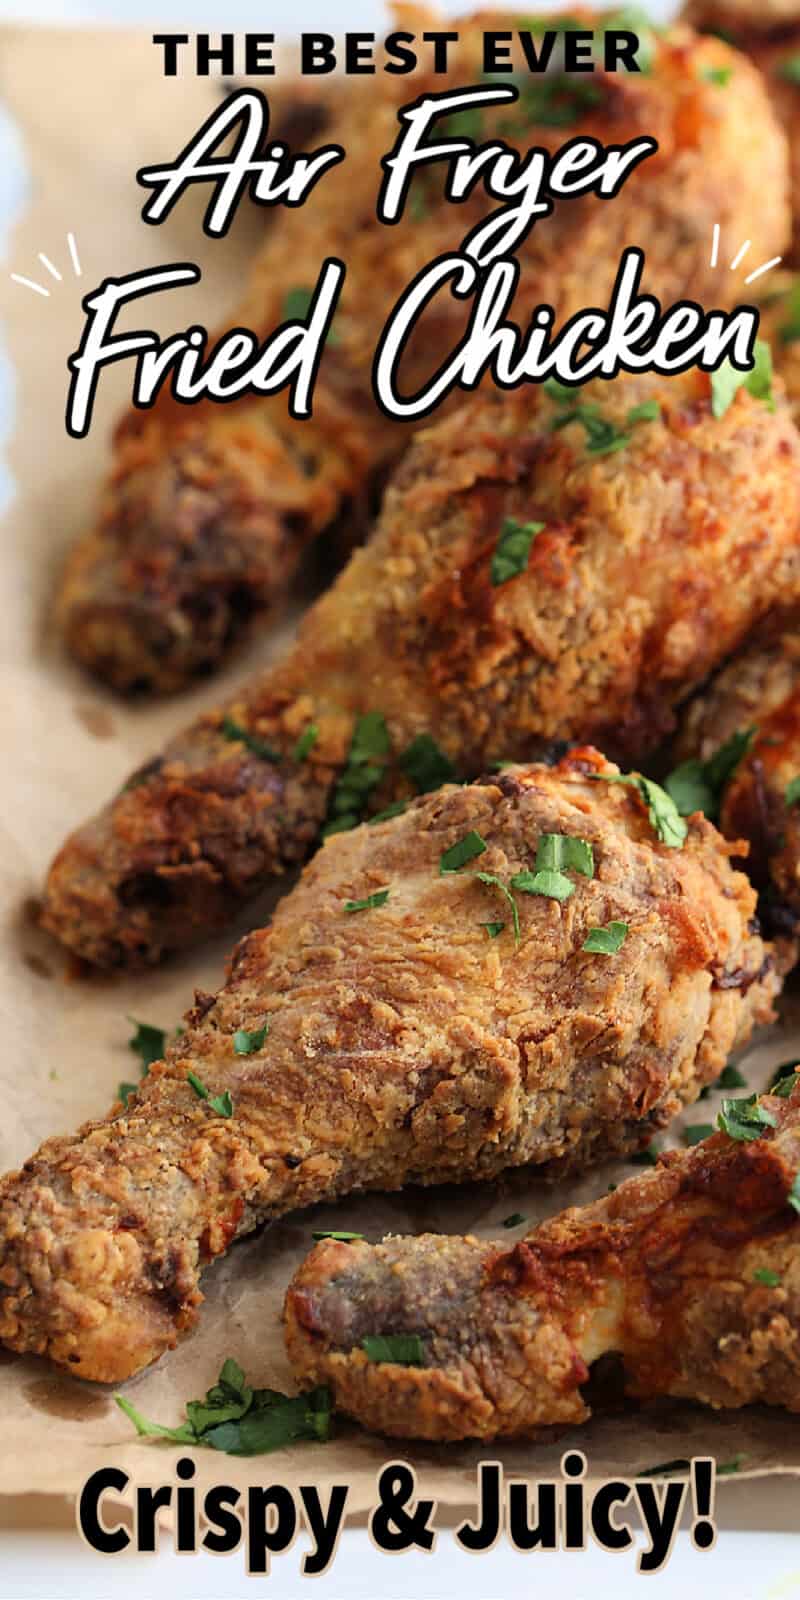 pieces of fried chicken on brown paper with text overlay